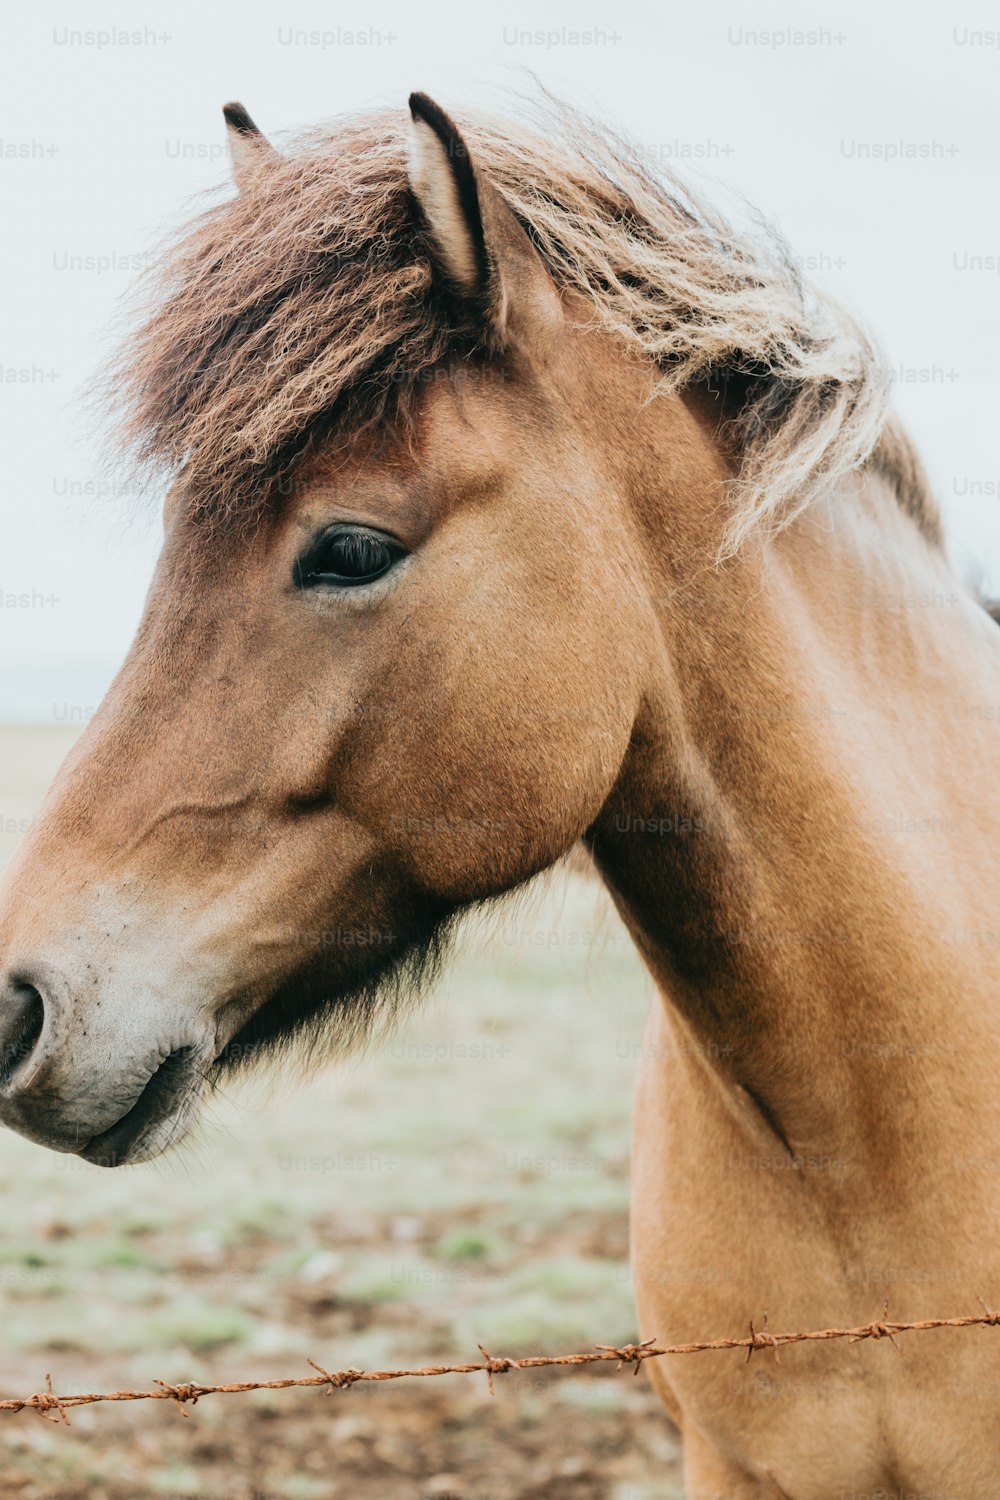 a close up of a horse behind a barbed wire fence